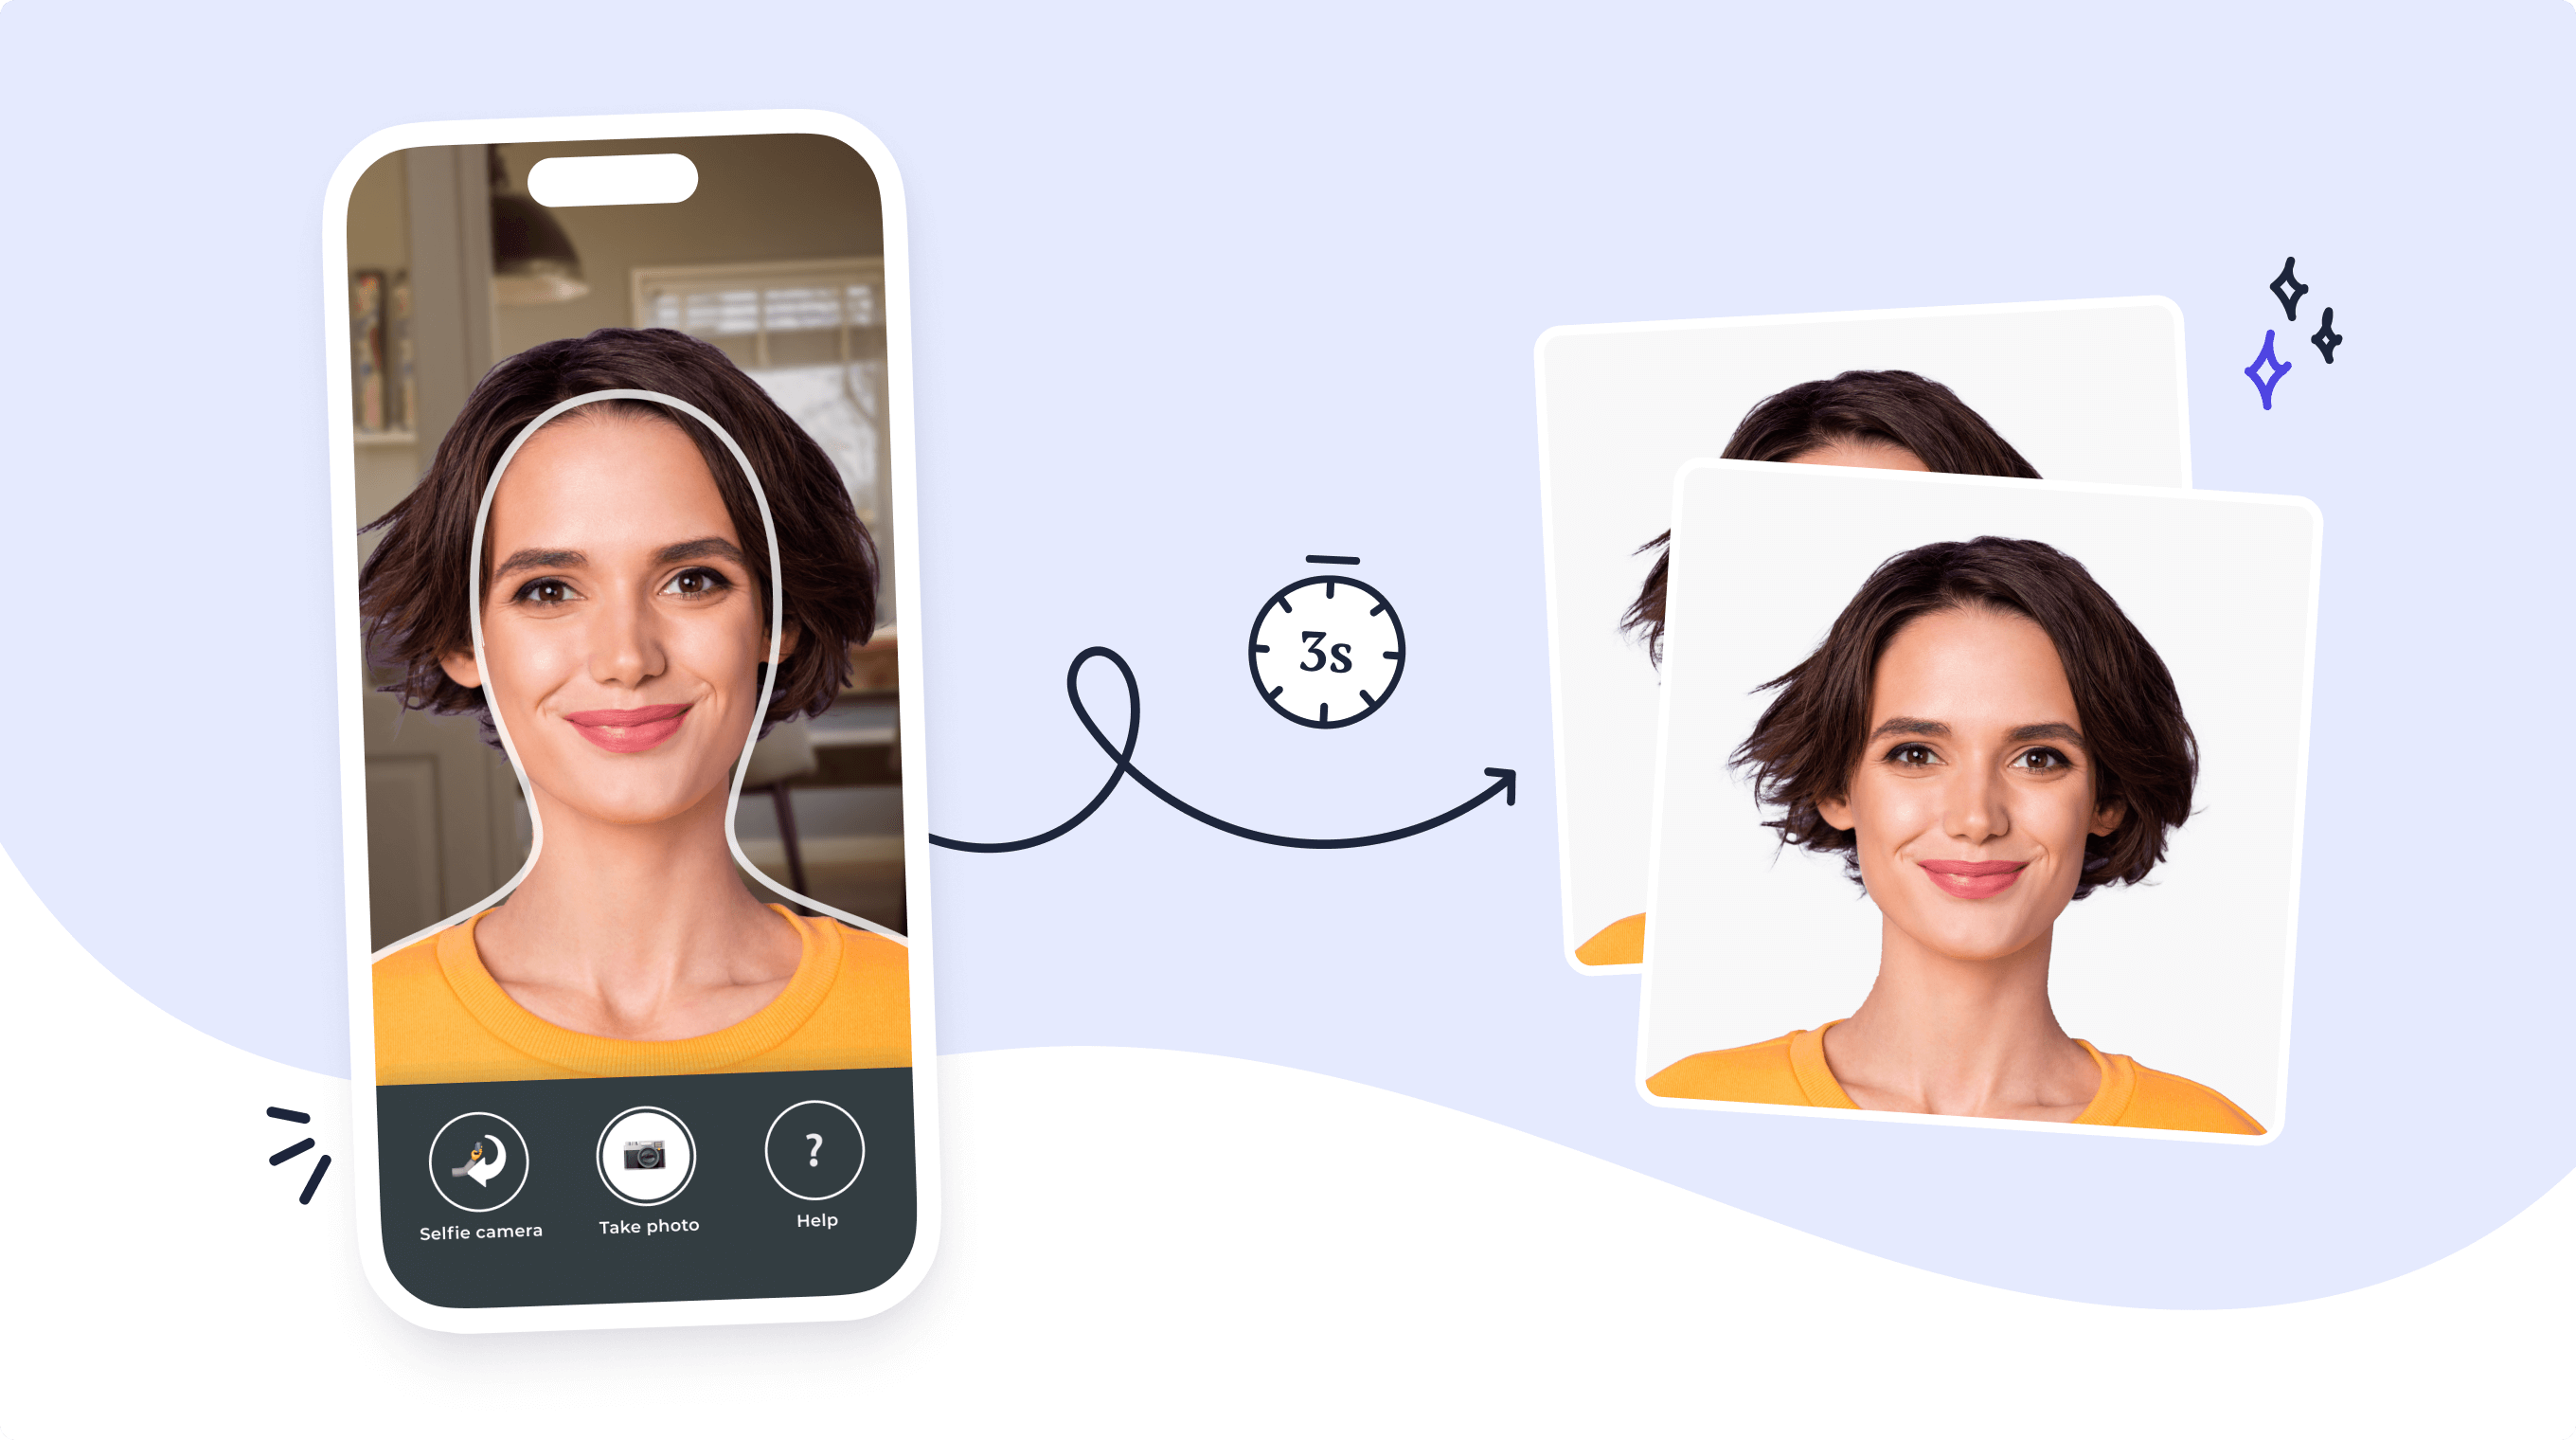 A picture converted into a government-compliant passport photo in 3 seconds using Passport Photo Online mobile app.